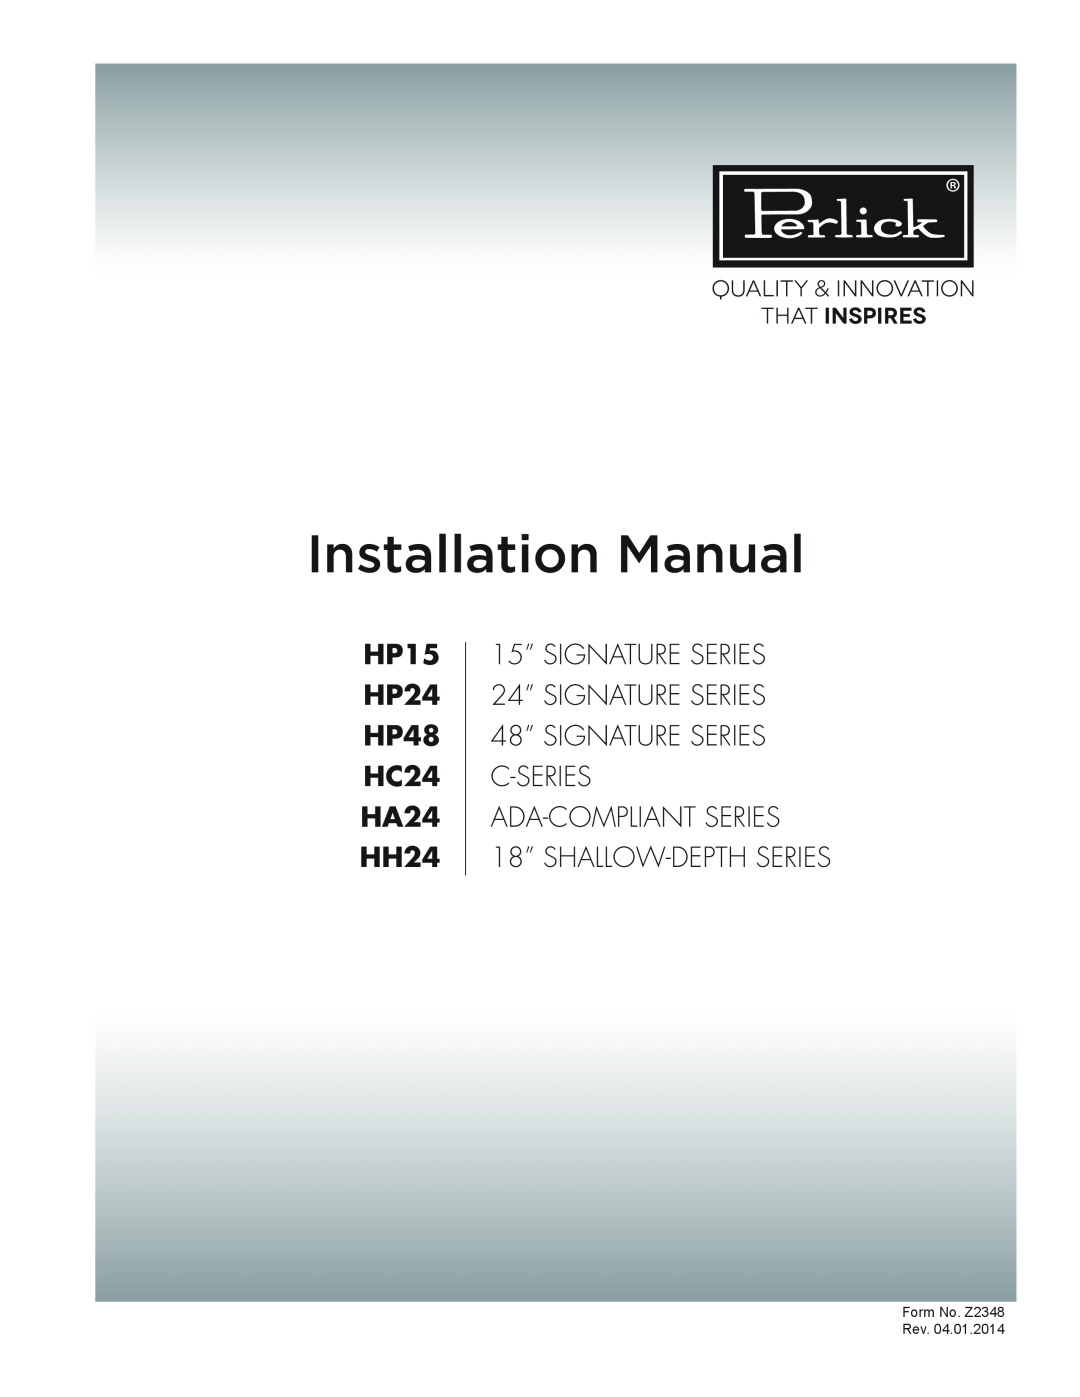 Perlick manual Use and Care Guide, All Models, HP15 HP24 HP48 HC24 HA24 HH24 